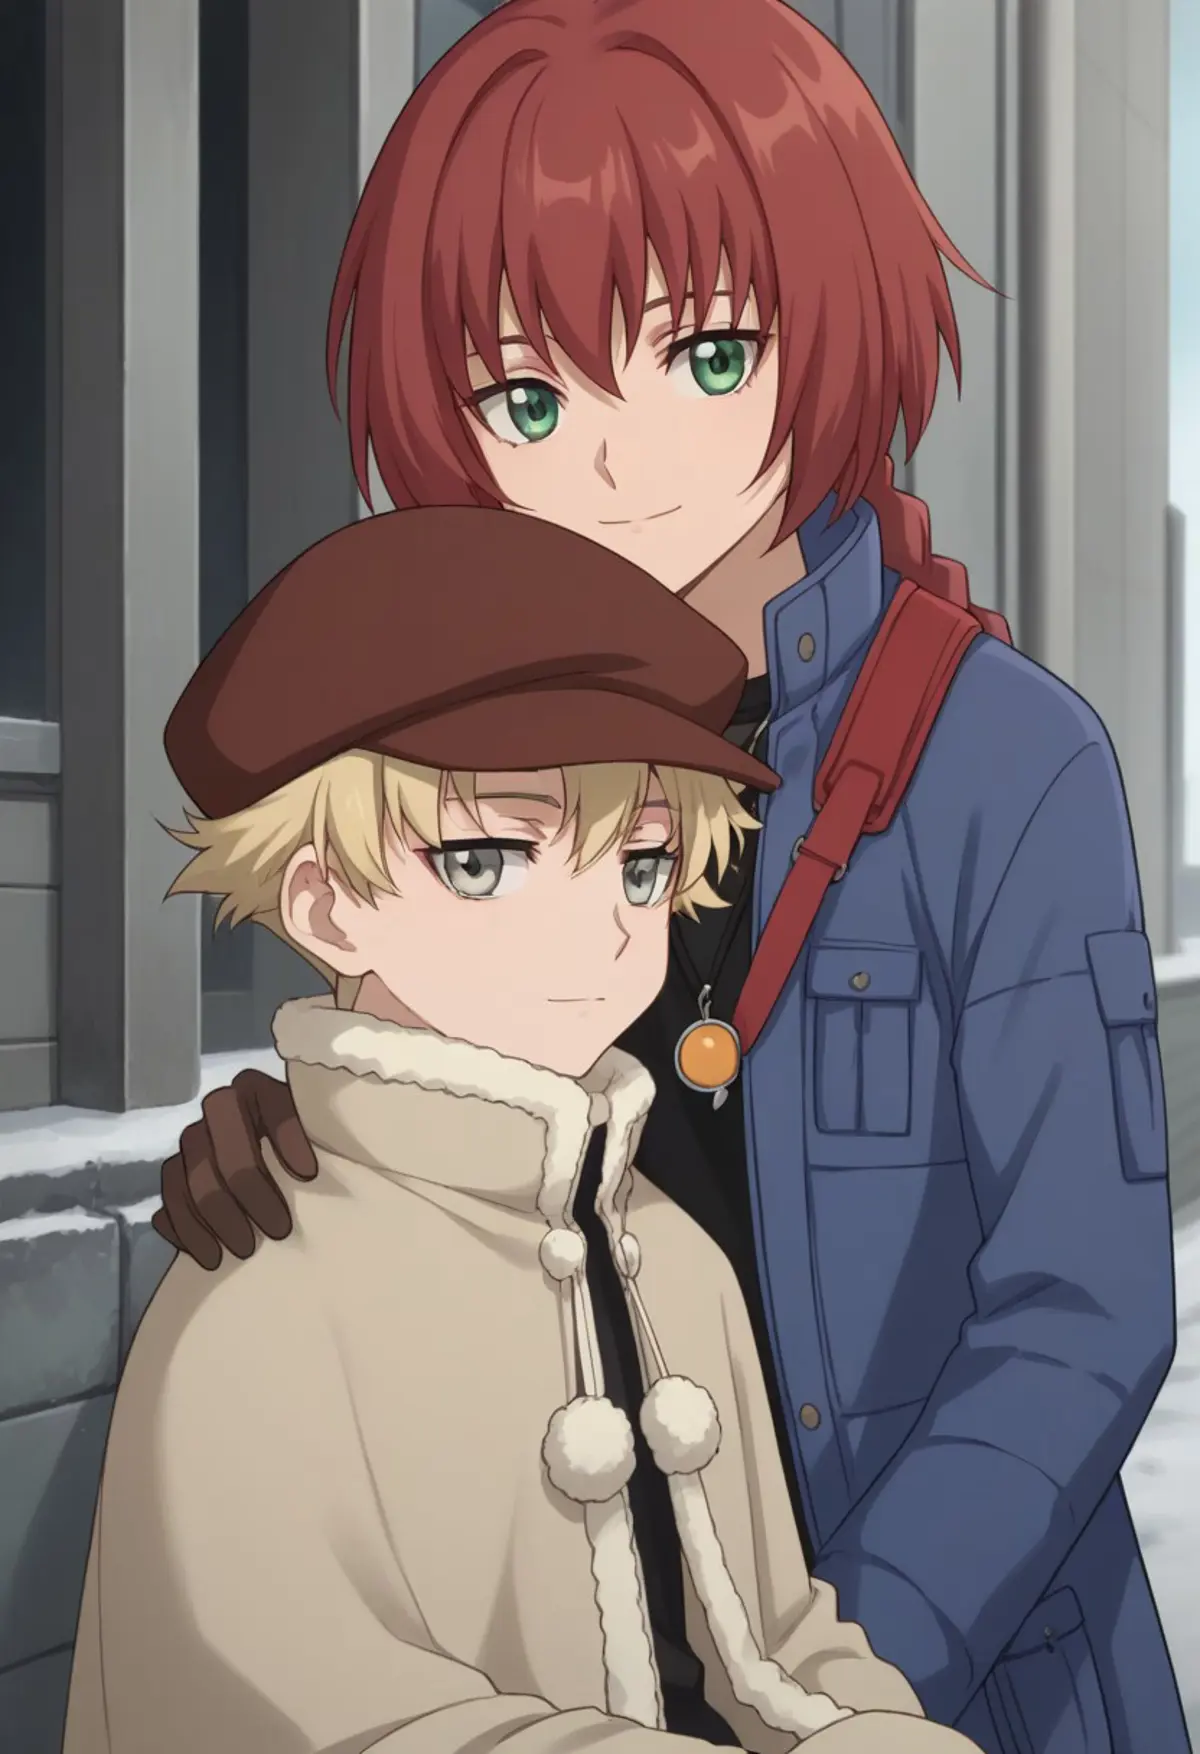 Two children posing for a photo in front of a building. The boy in the foreground is dressed in a cream-colored cape with fluffy white trim and a brown hat. The girl behind him, with bright red hair, is wearing a blue jacket with the red straps of a bag over her shoulder, is resting her hand on the boy's shoulder.